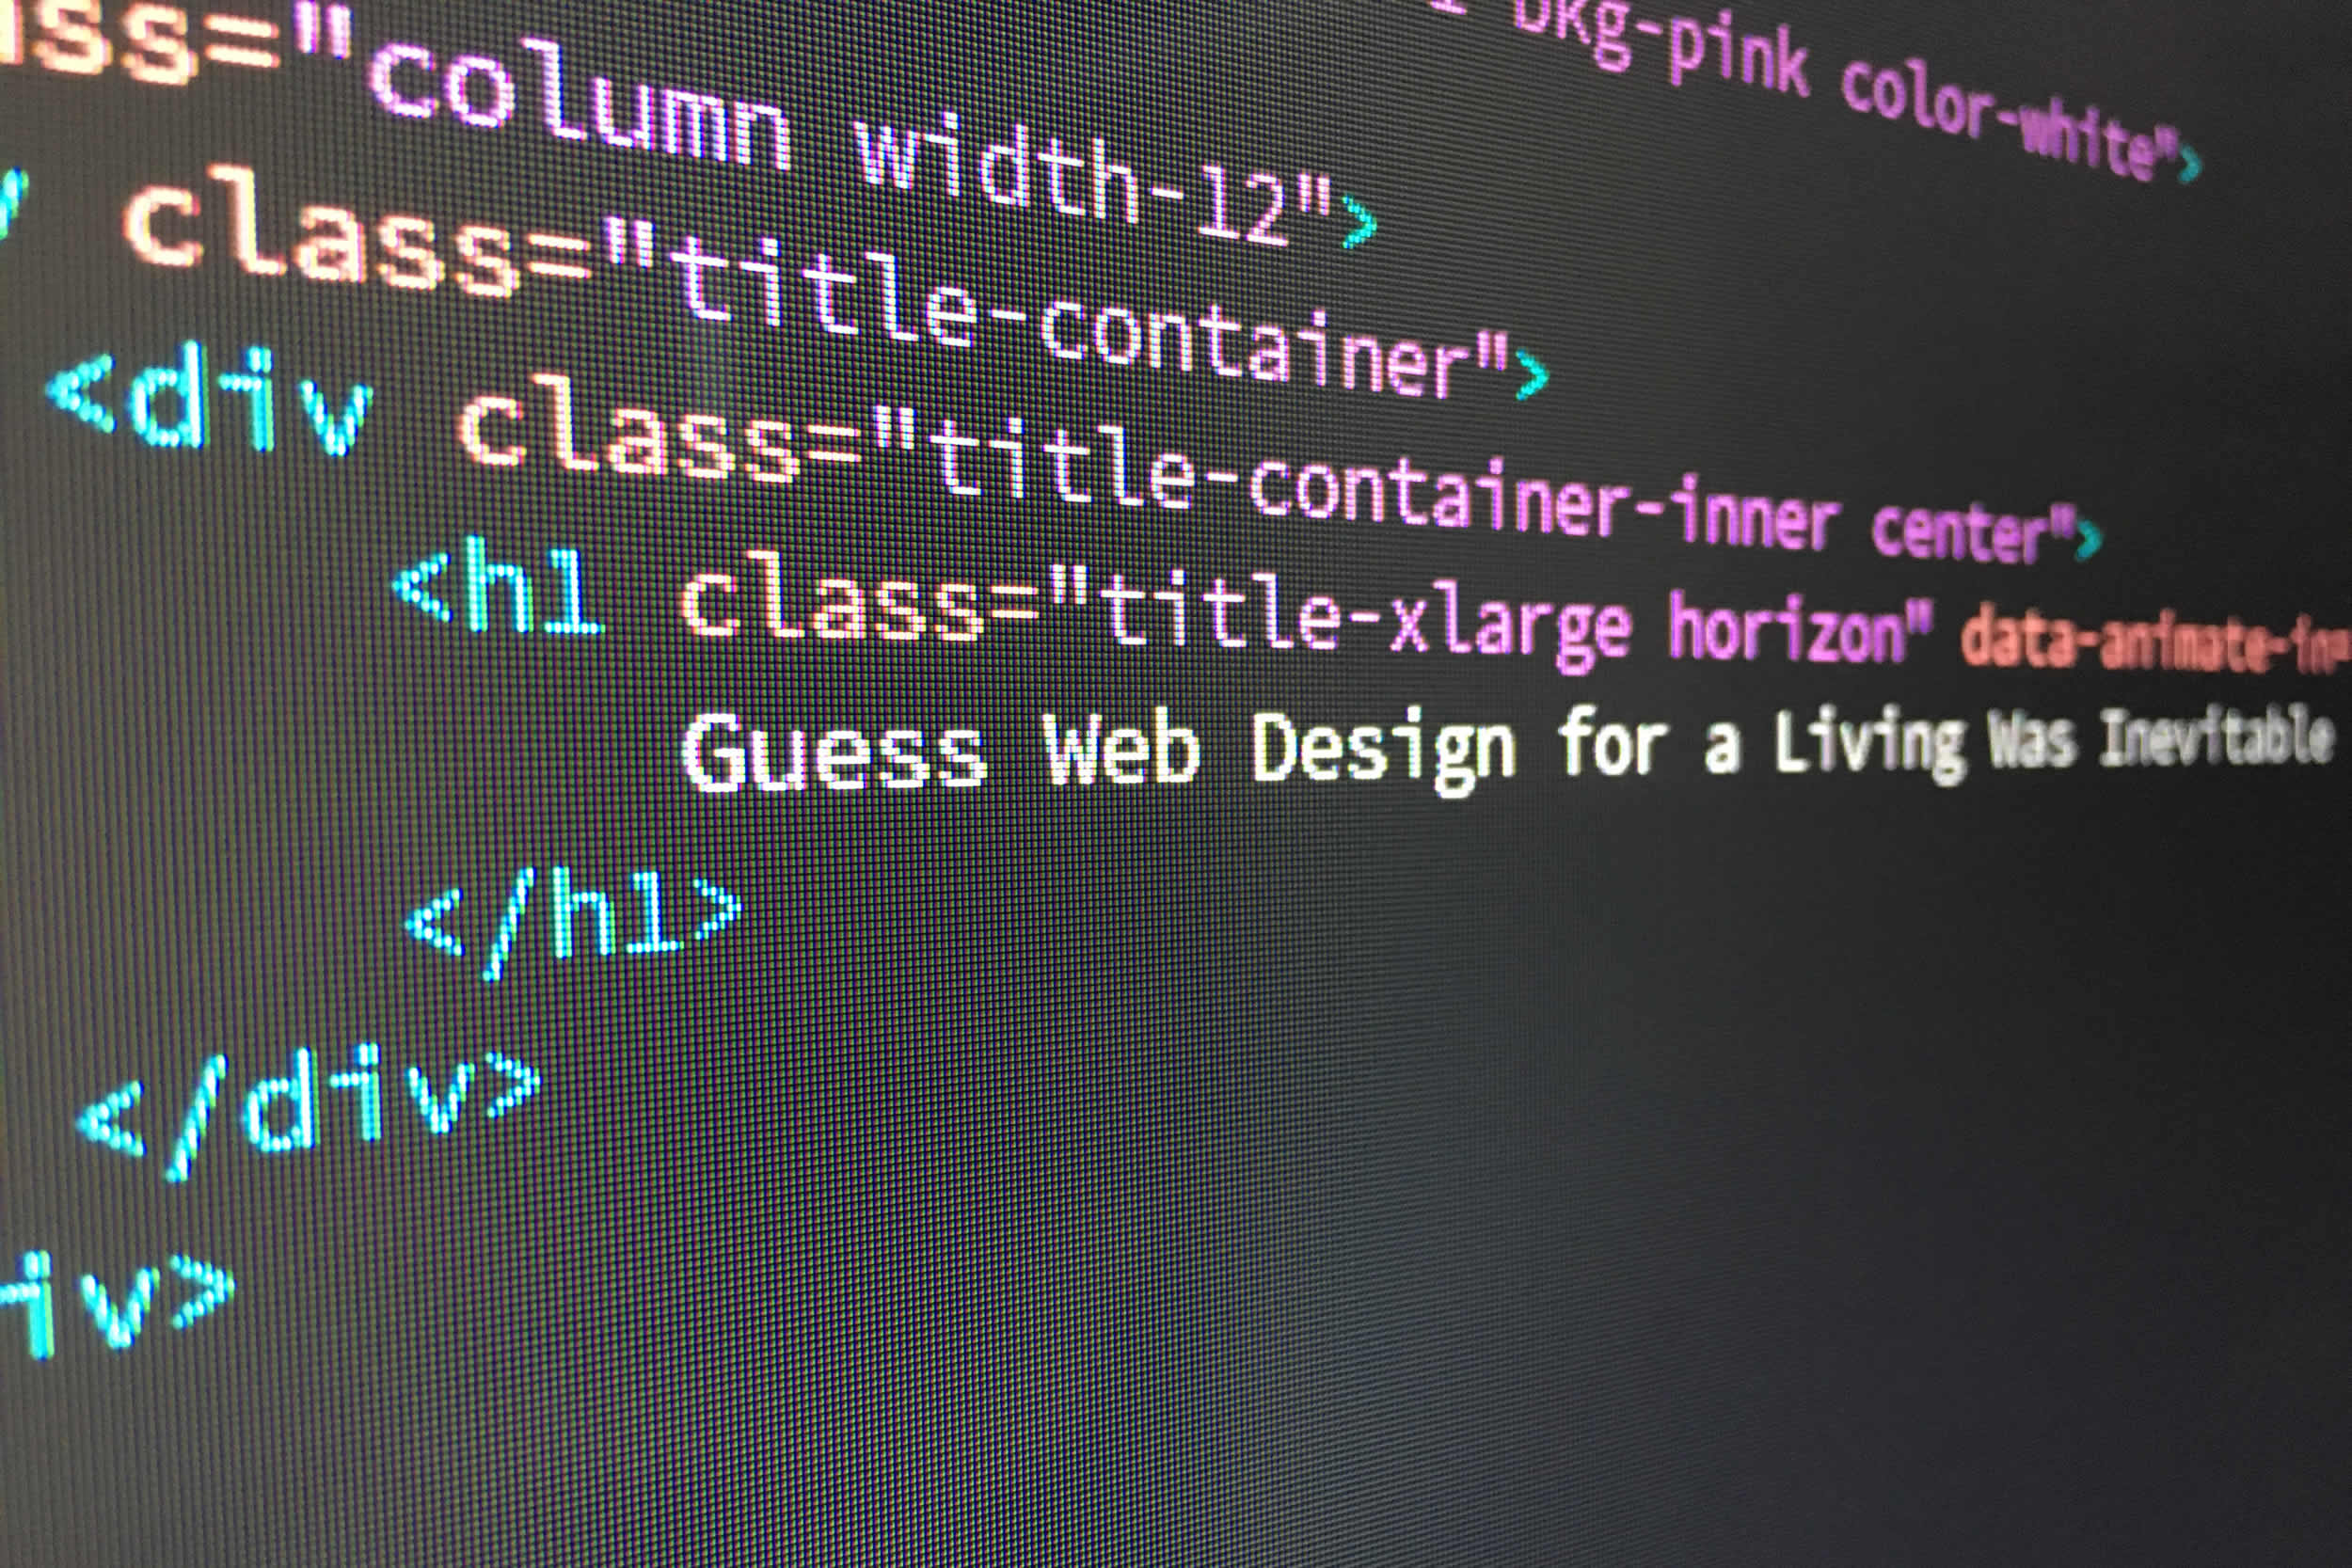 Guess Web Design for a Living Was Inevitable